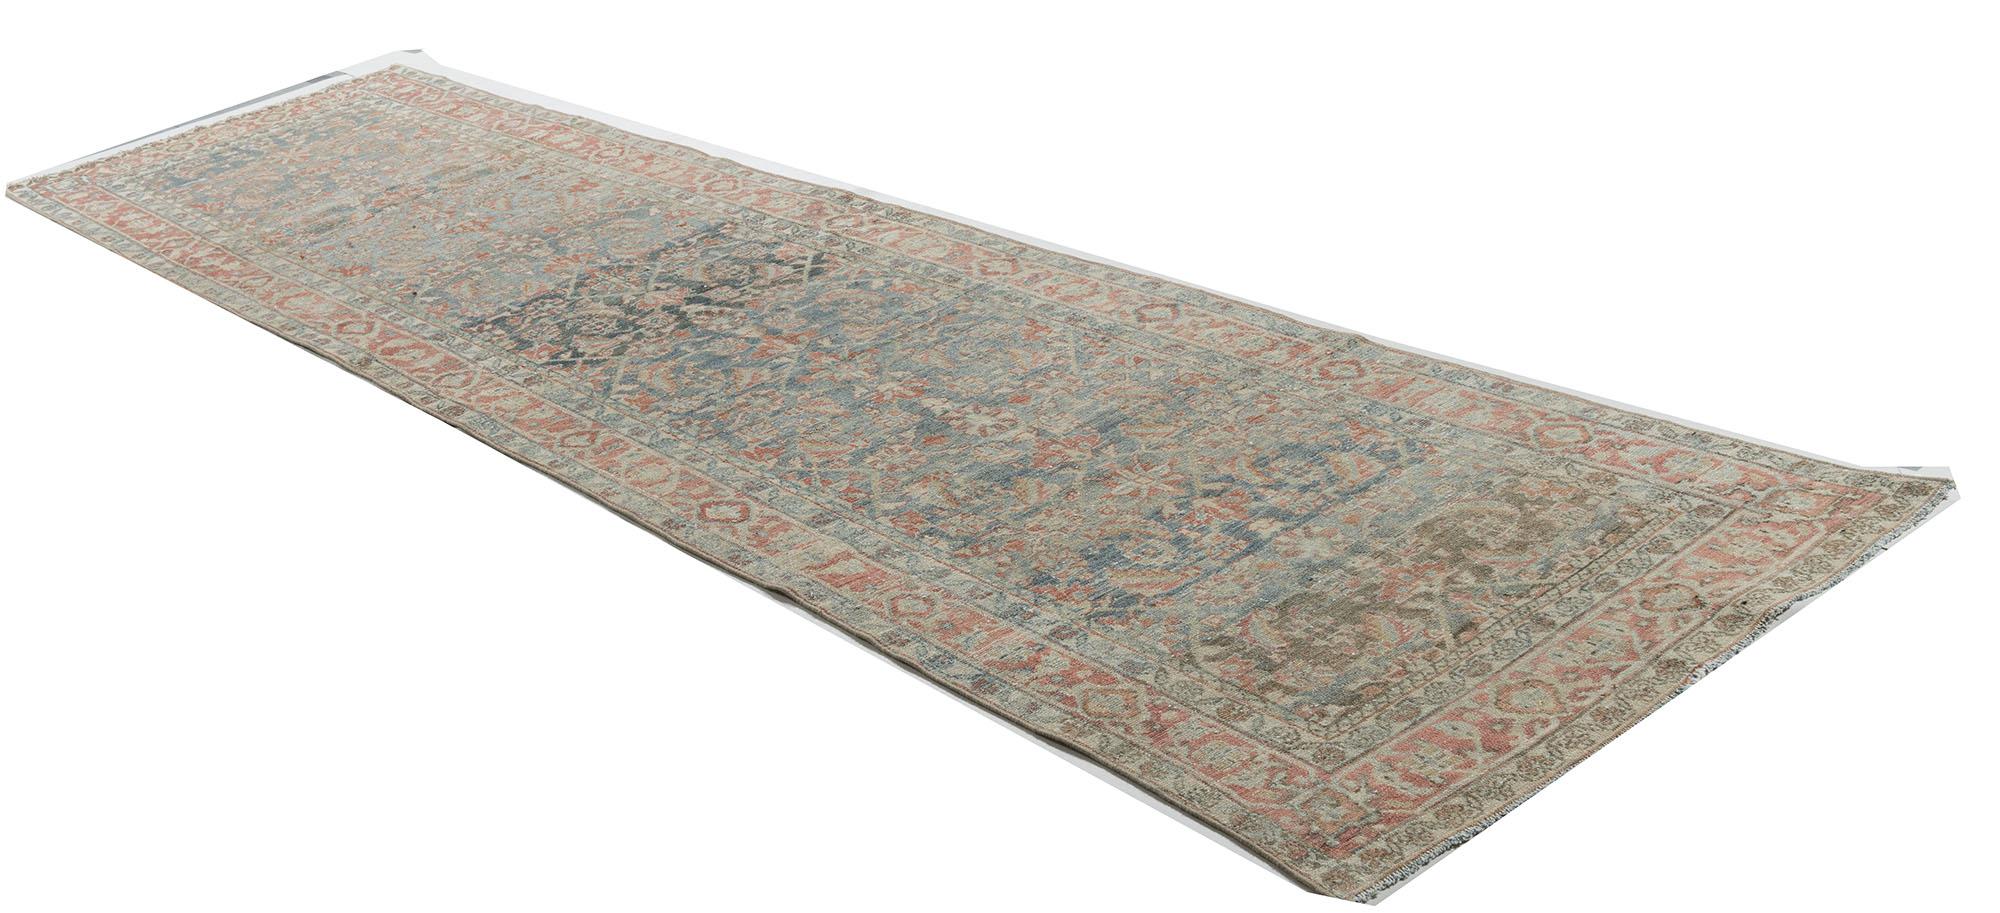 Vintage Distressed Persian Malayer Runner 3'1 x 12'9 For Sale 1